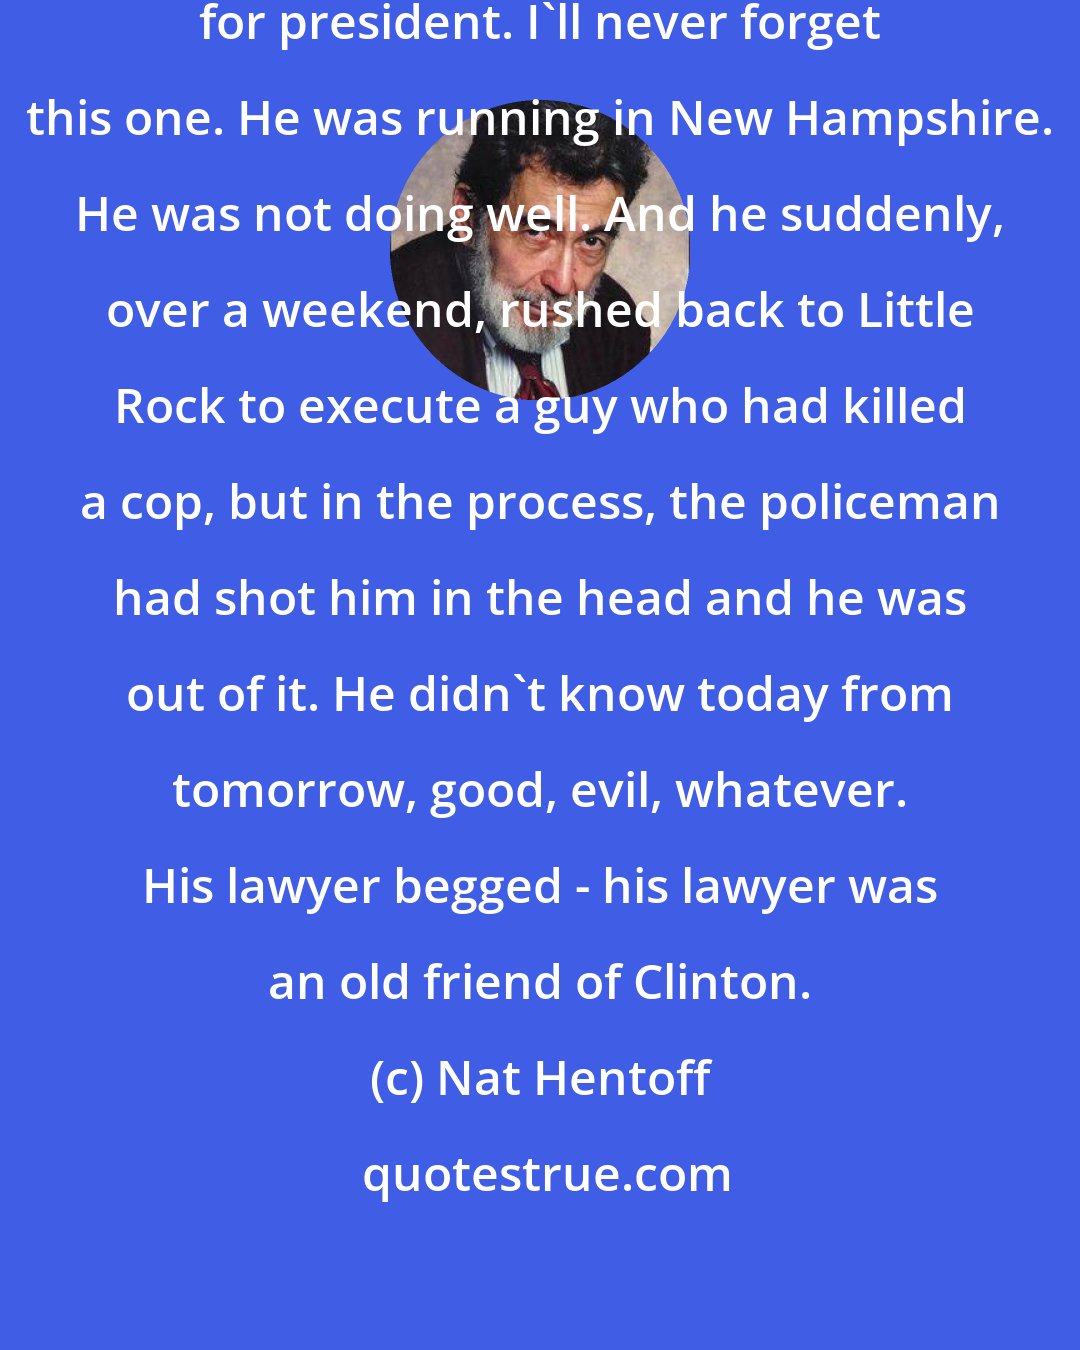 Nat Hentoff: When [Bill Clinton] was running for president. I'll never forget this one. He was running in New Hampshire. He was not doing well. And he suddenly, over a weekend, rushed back to Little Rock to execute a guy who had killed a cop, but in the process, the policeman had shot him in the head and he was out of it. He didn't know today from tomorrow, good, evil, whatever. His lawyer begged - his lawyer was an old friend of Clinton.